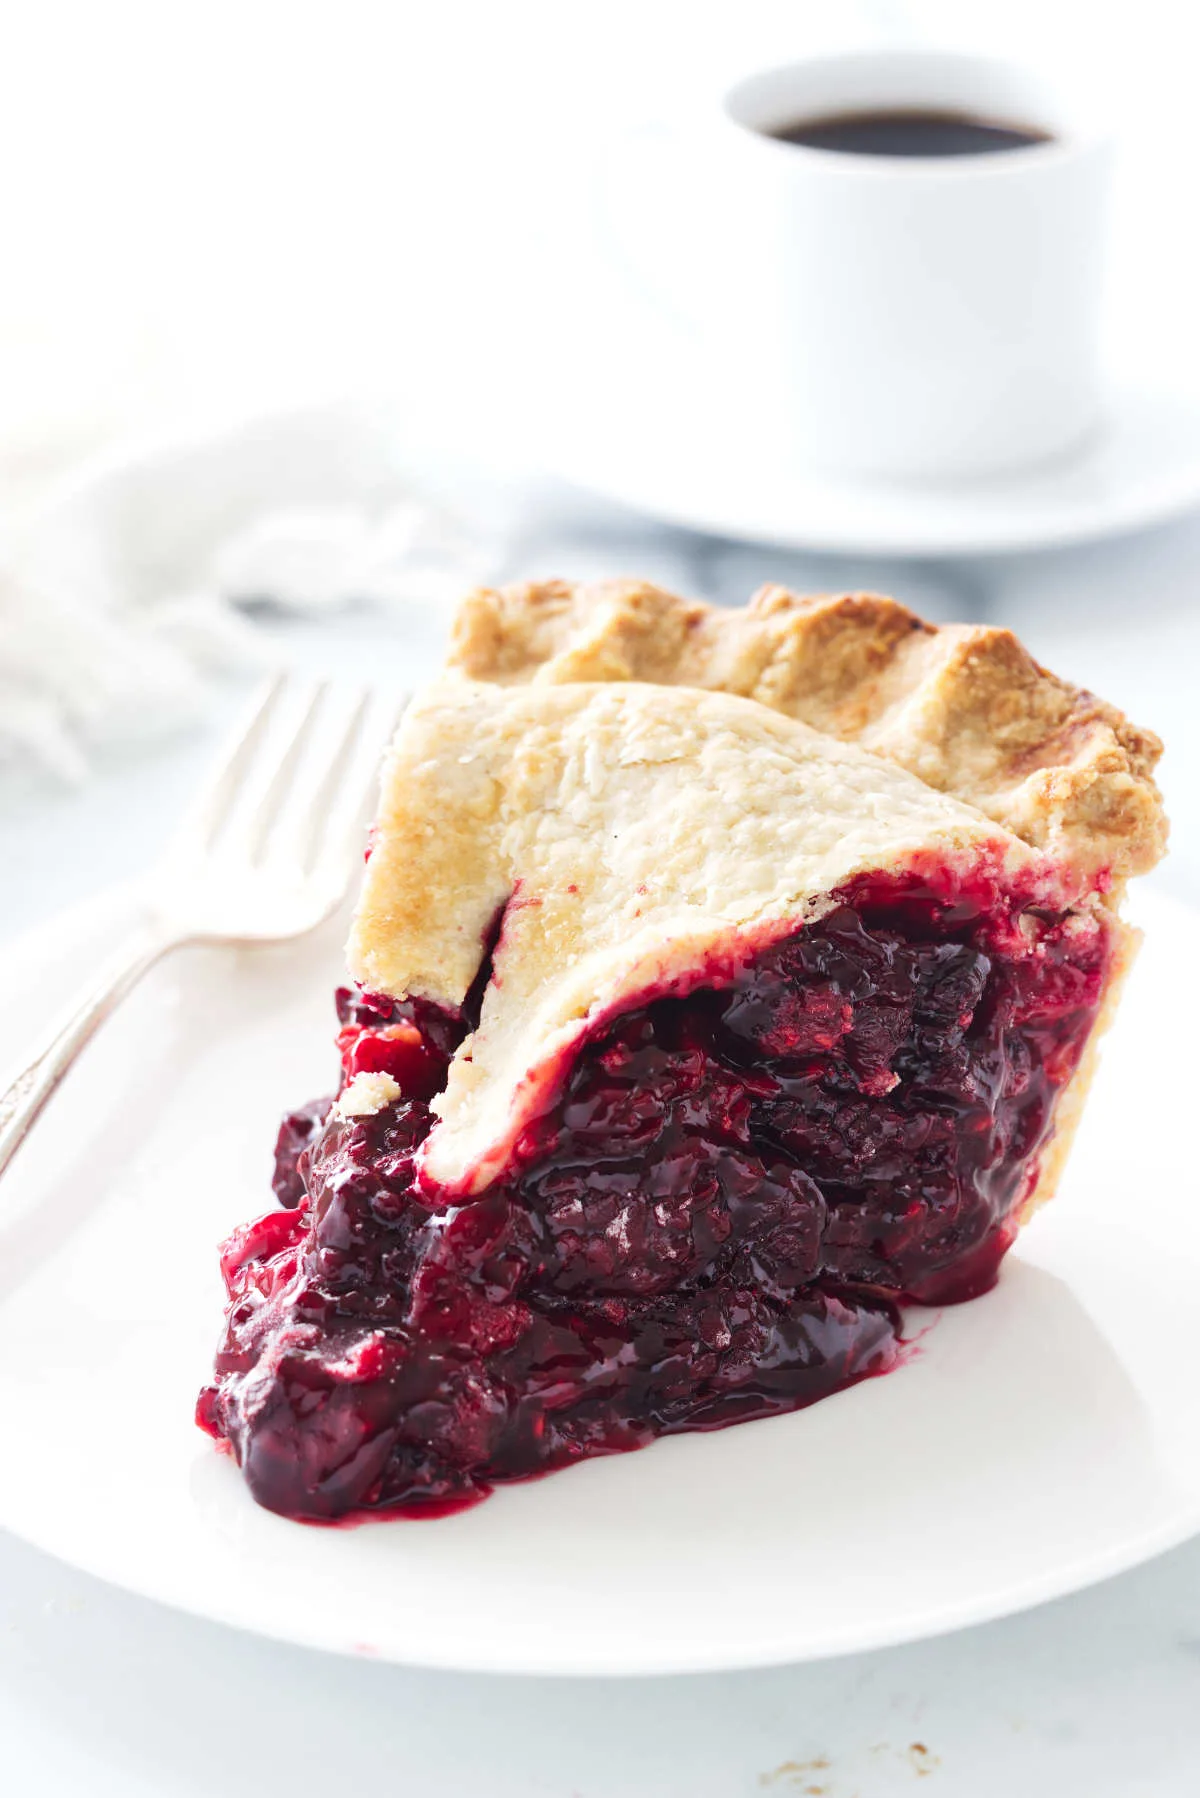 A serving of raspberry/blackberry pie on a plate and fork. Napkin and a cup of coffee in the background.